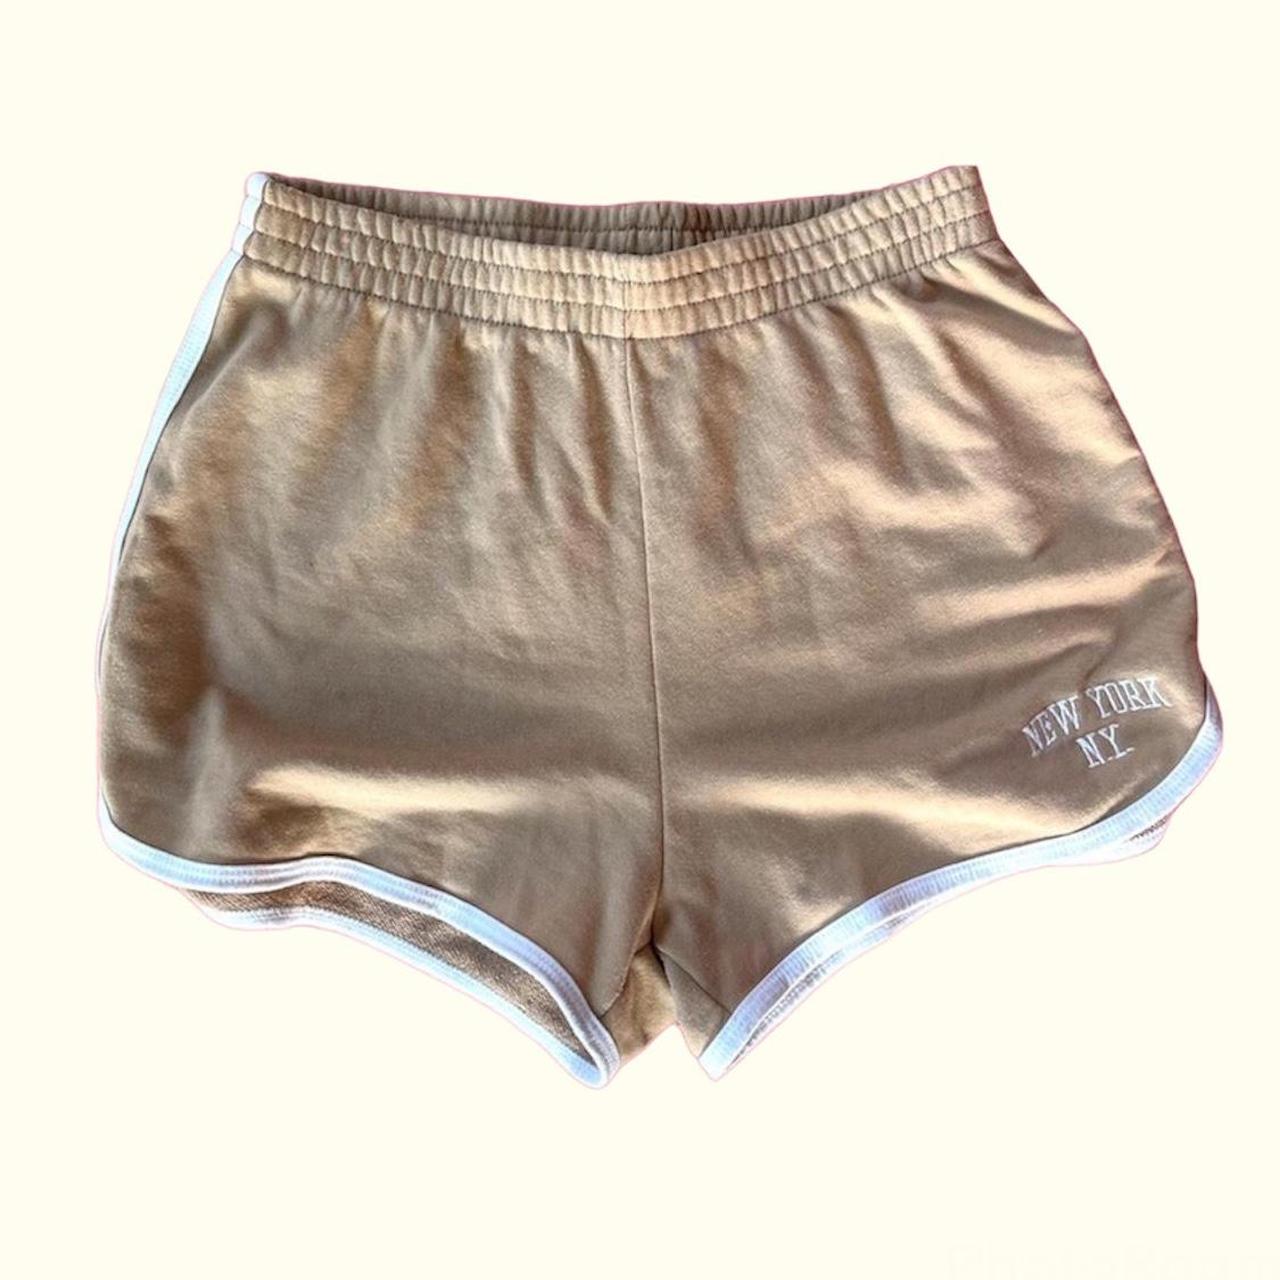 Product Image 1 - 🤎tillys tan new york shorts🤎
-size